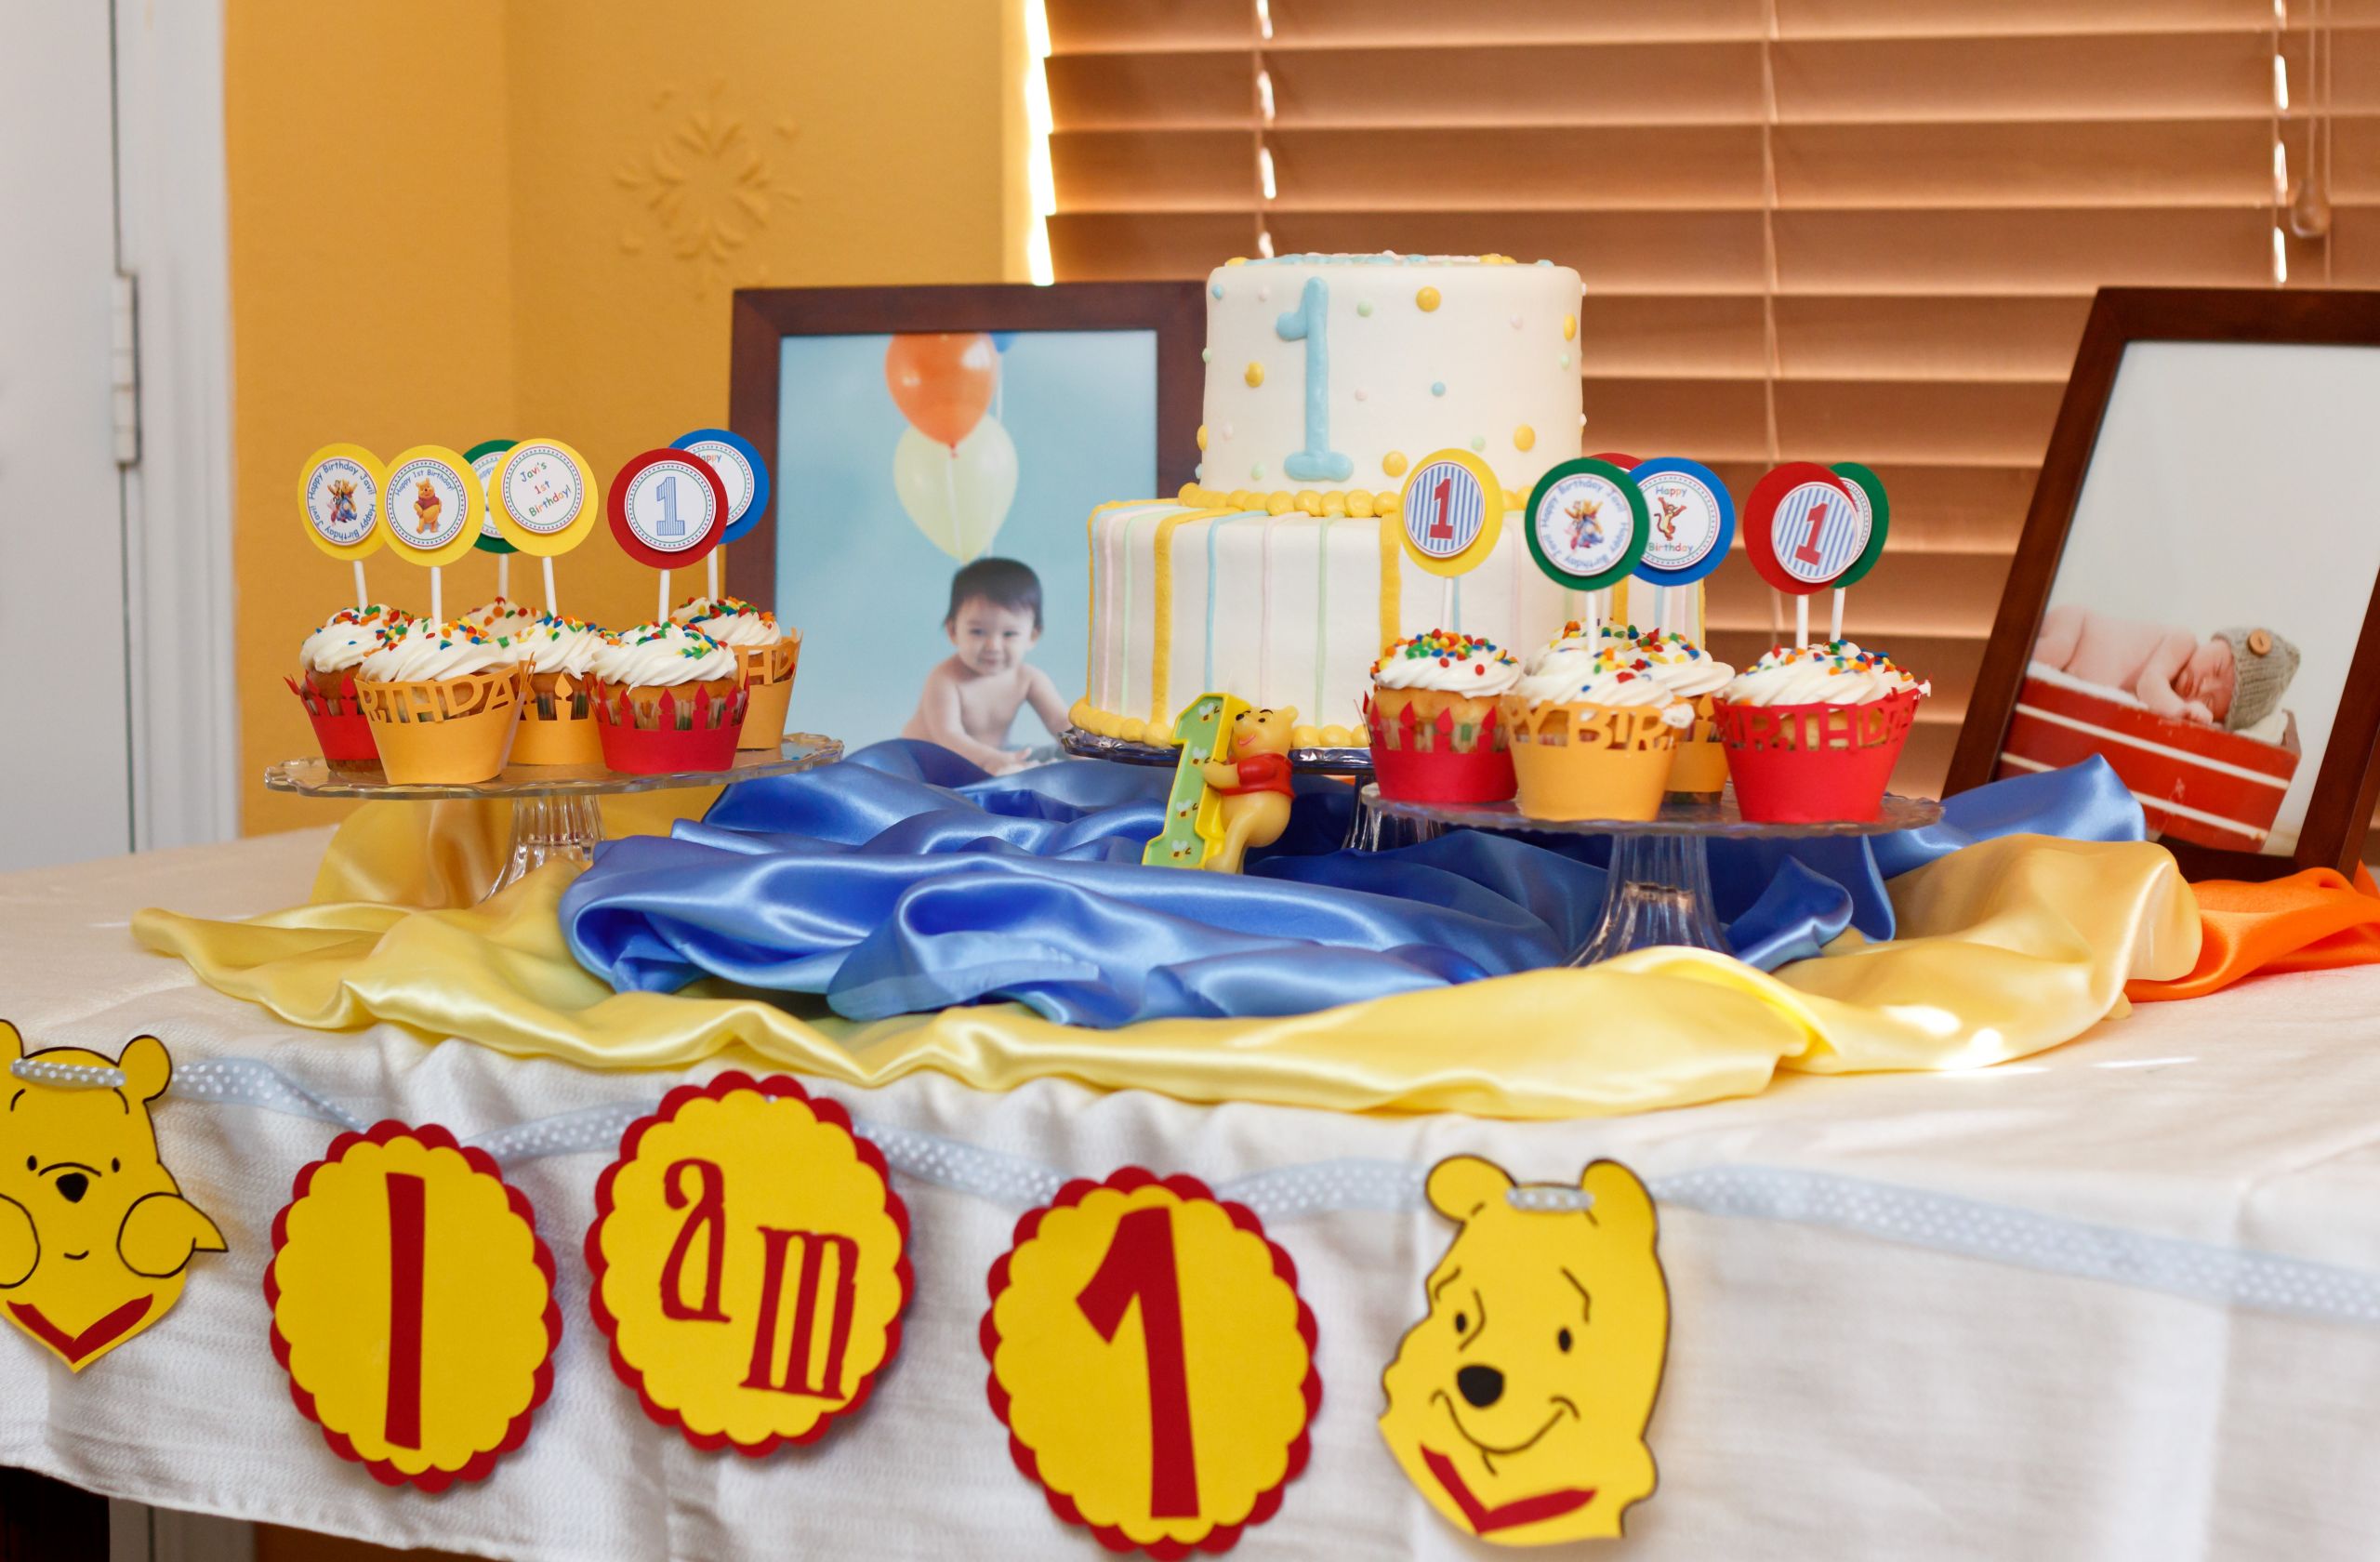 Winnie The Pooh Decorations 1st Birthday
 Winnie the Pooh My son’s first birthday party